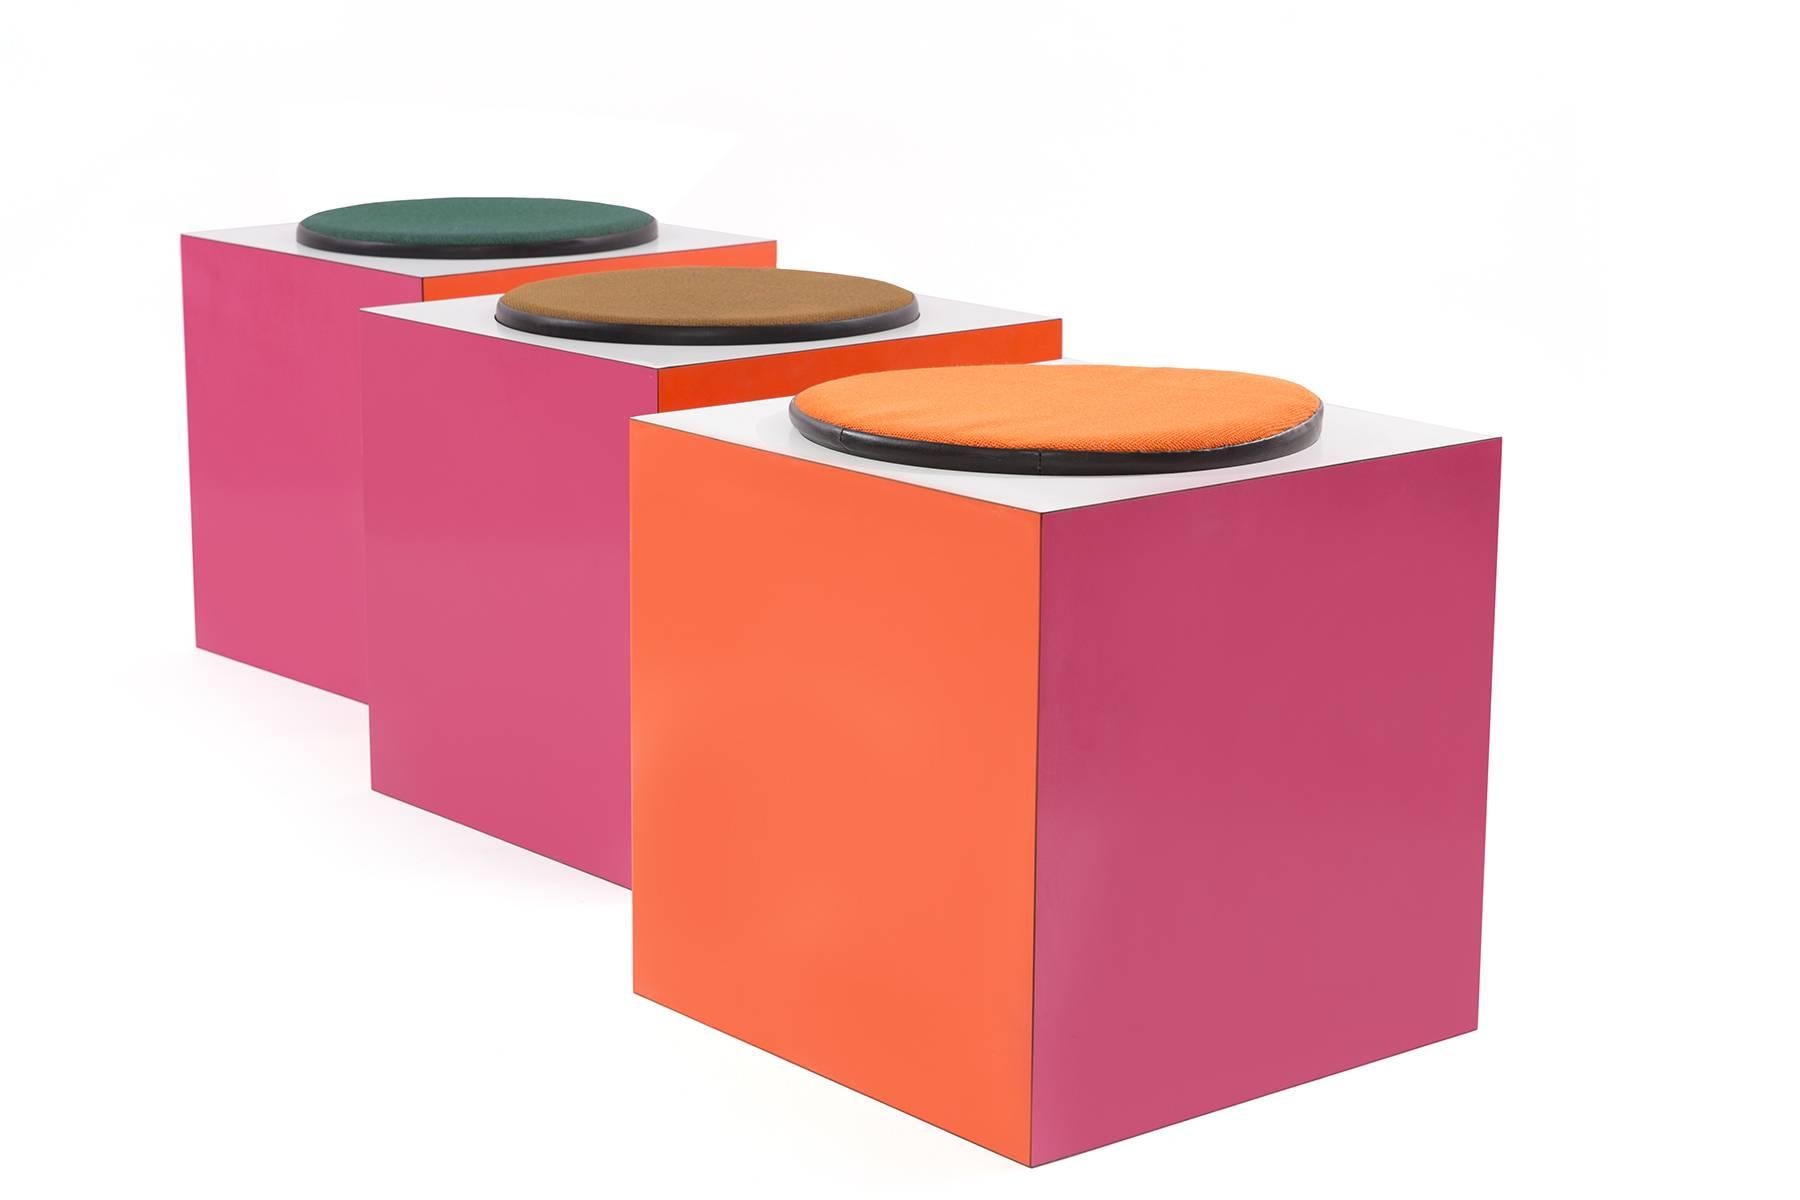 Canadian Cube Ottomans from 1967 Montreal World Expo